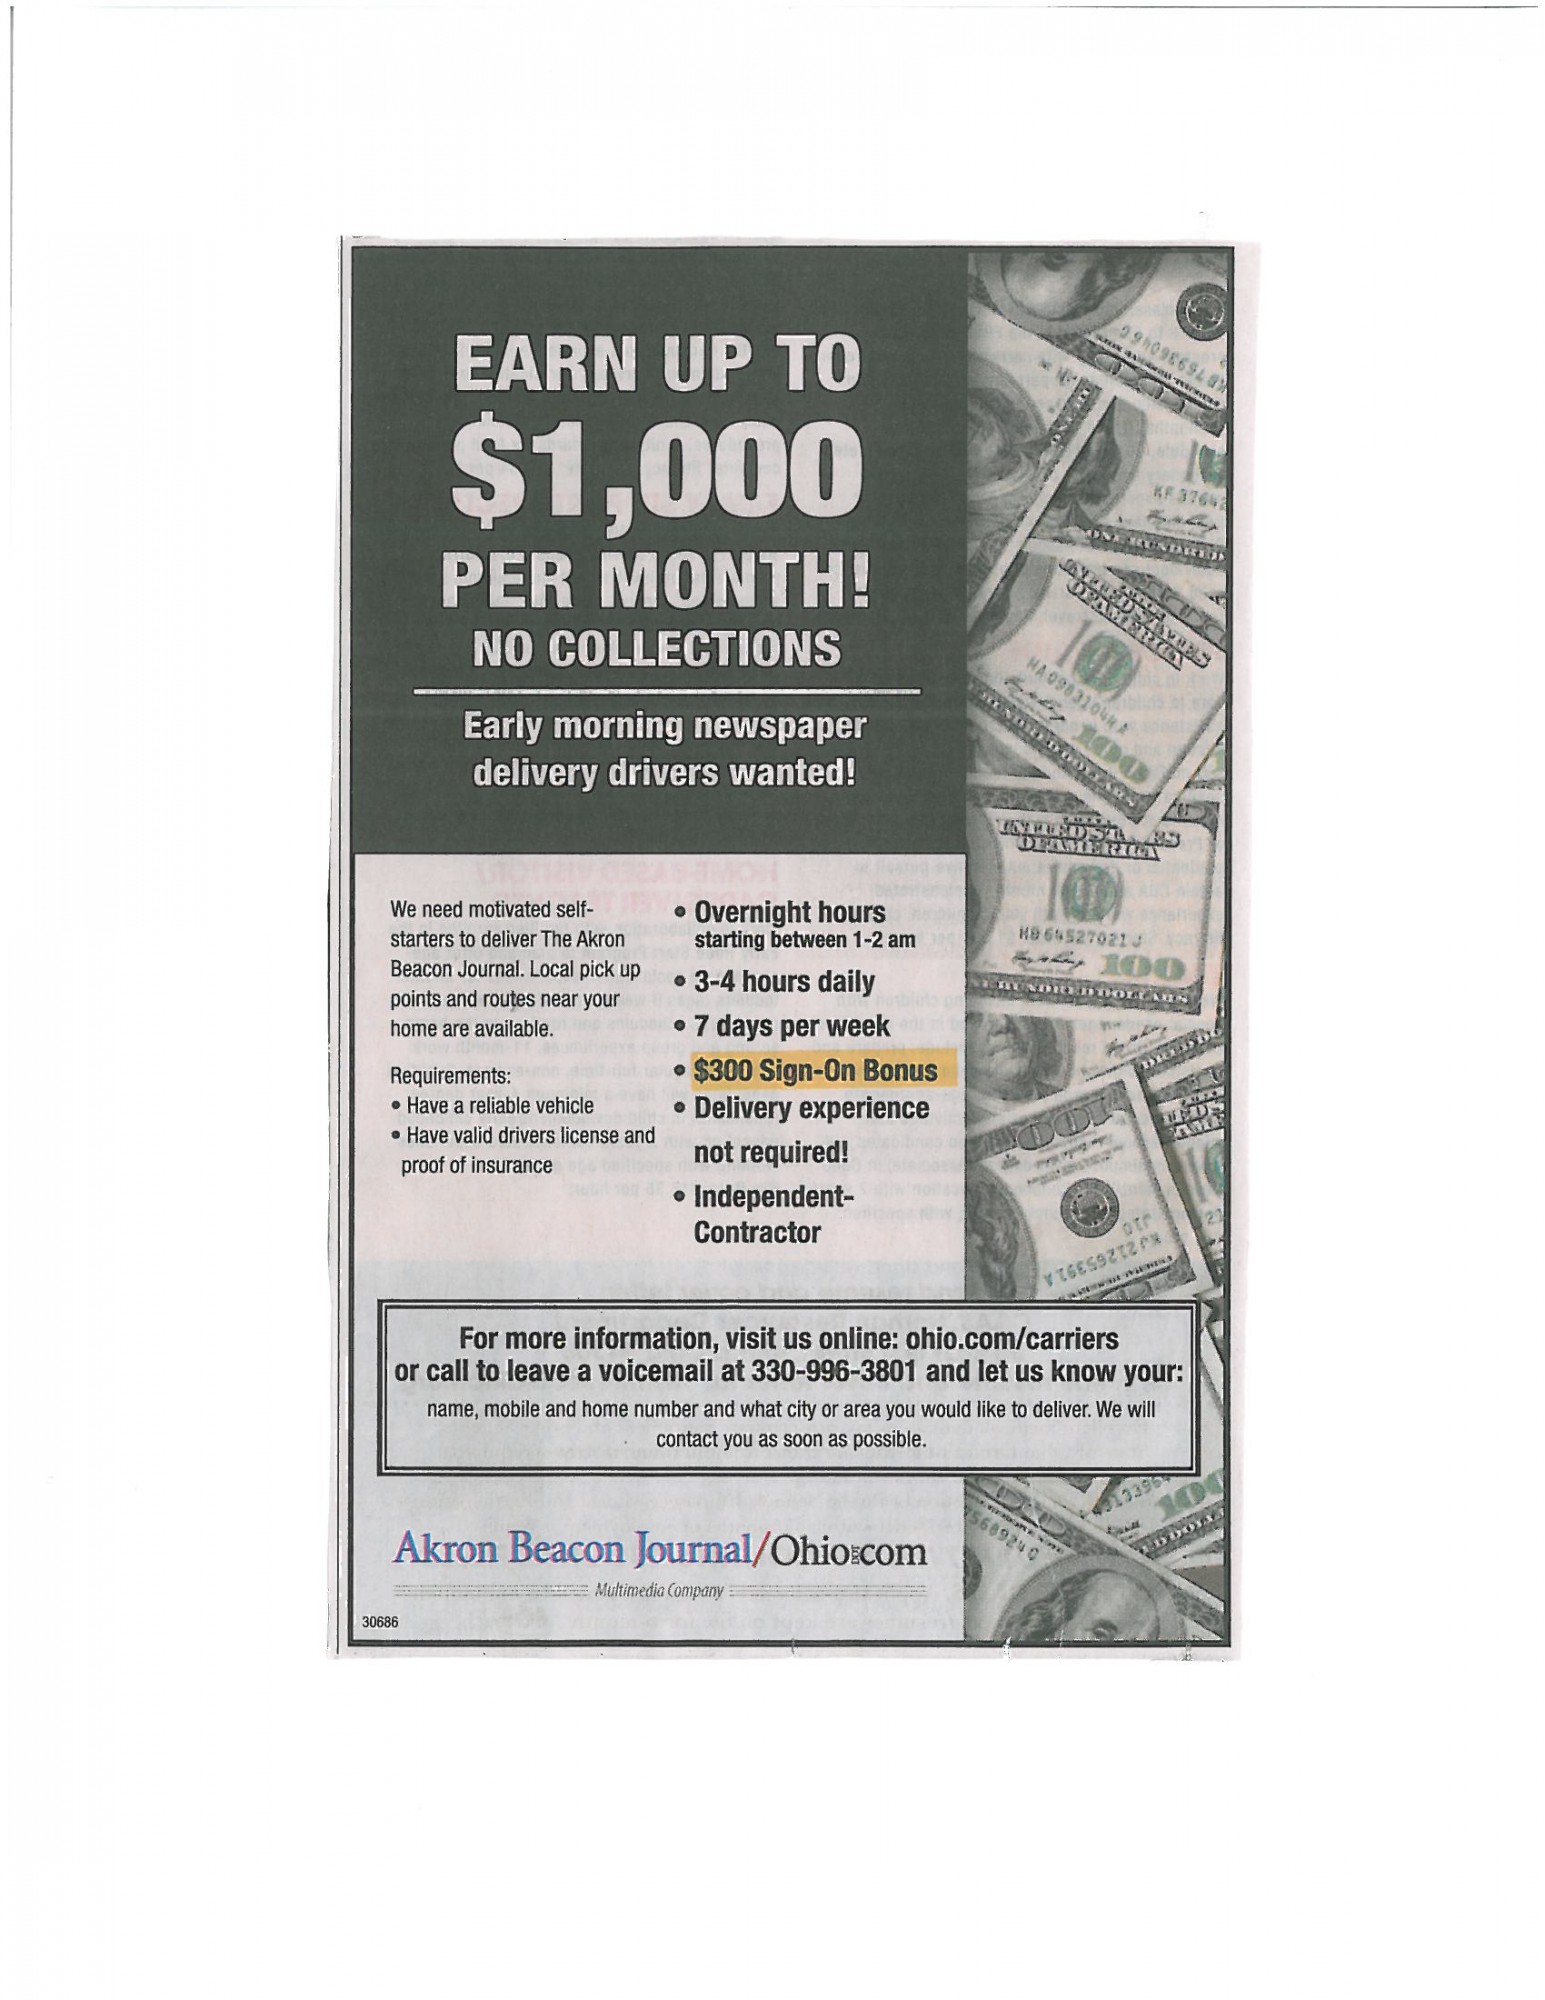 Earn Up To $1000 per month